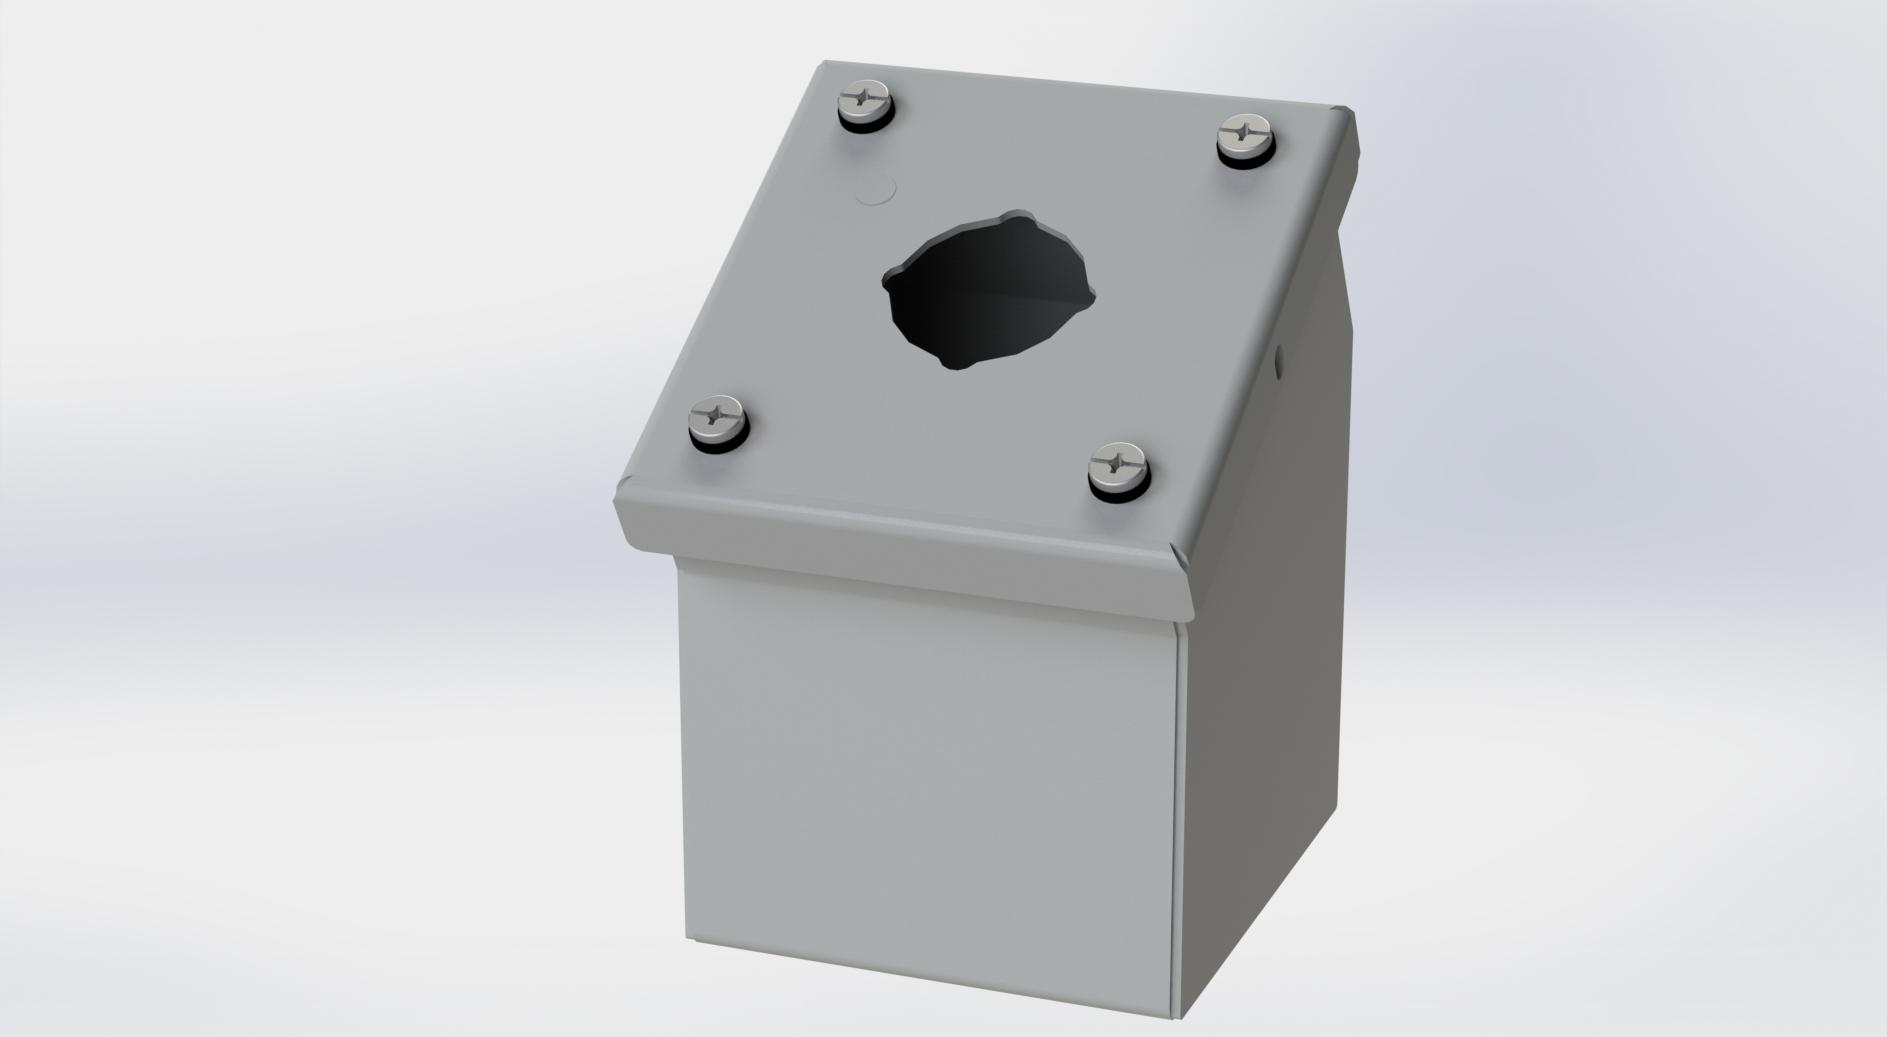 Saginaw Control SCE-1PBA PBA Enclosure, Height:3.50", Width:3.25", Depth:4.87", ANSI-61 gray powder coating inside and out.